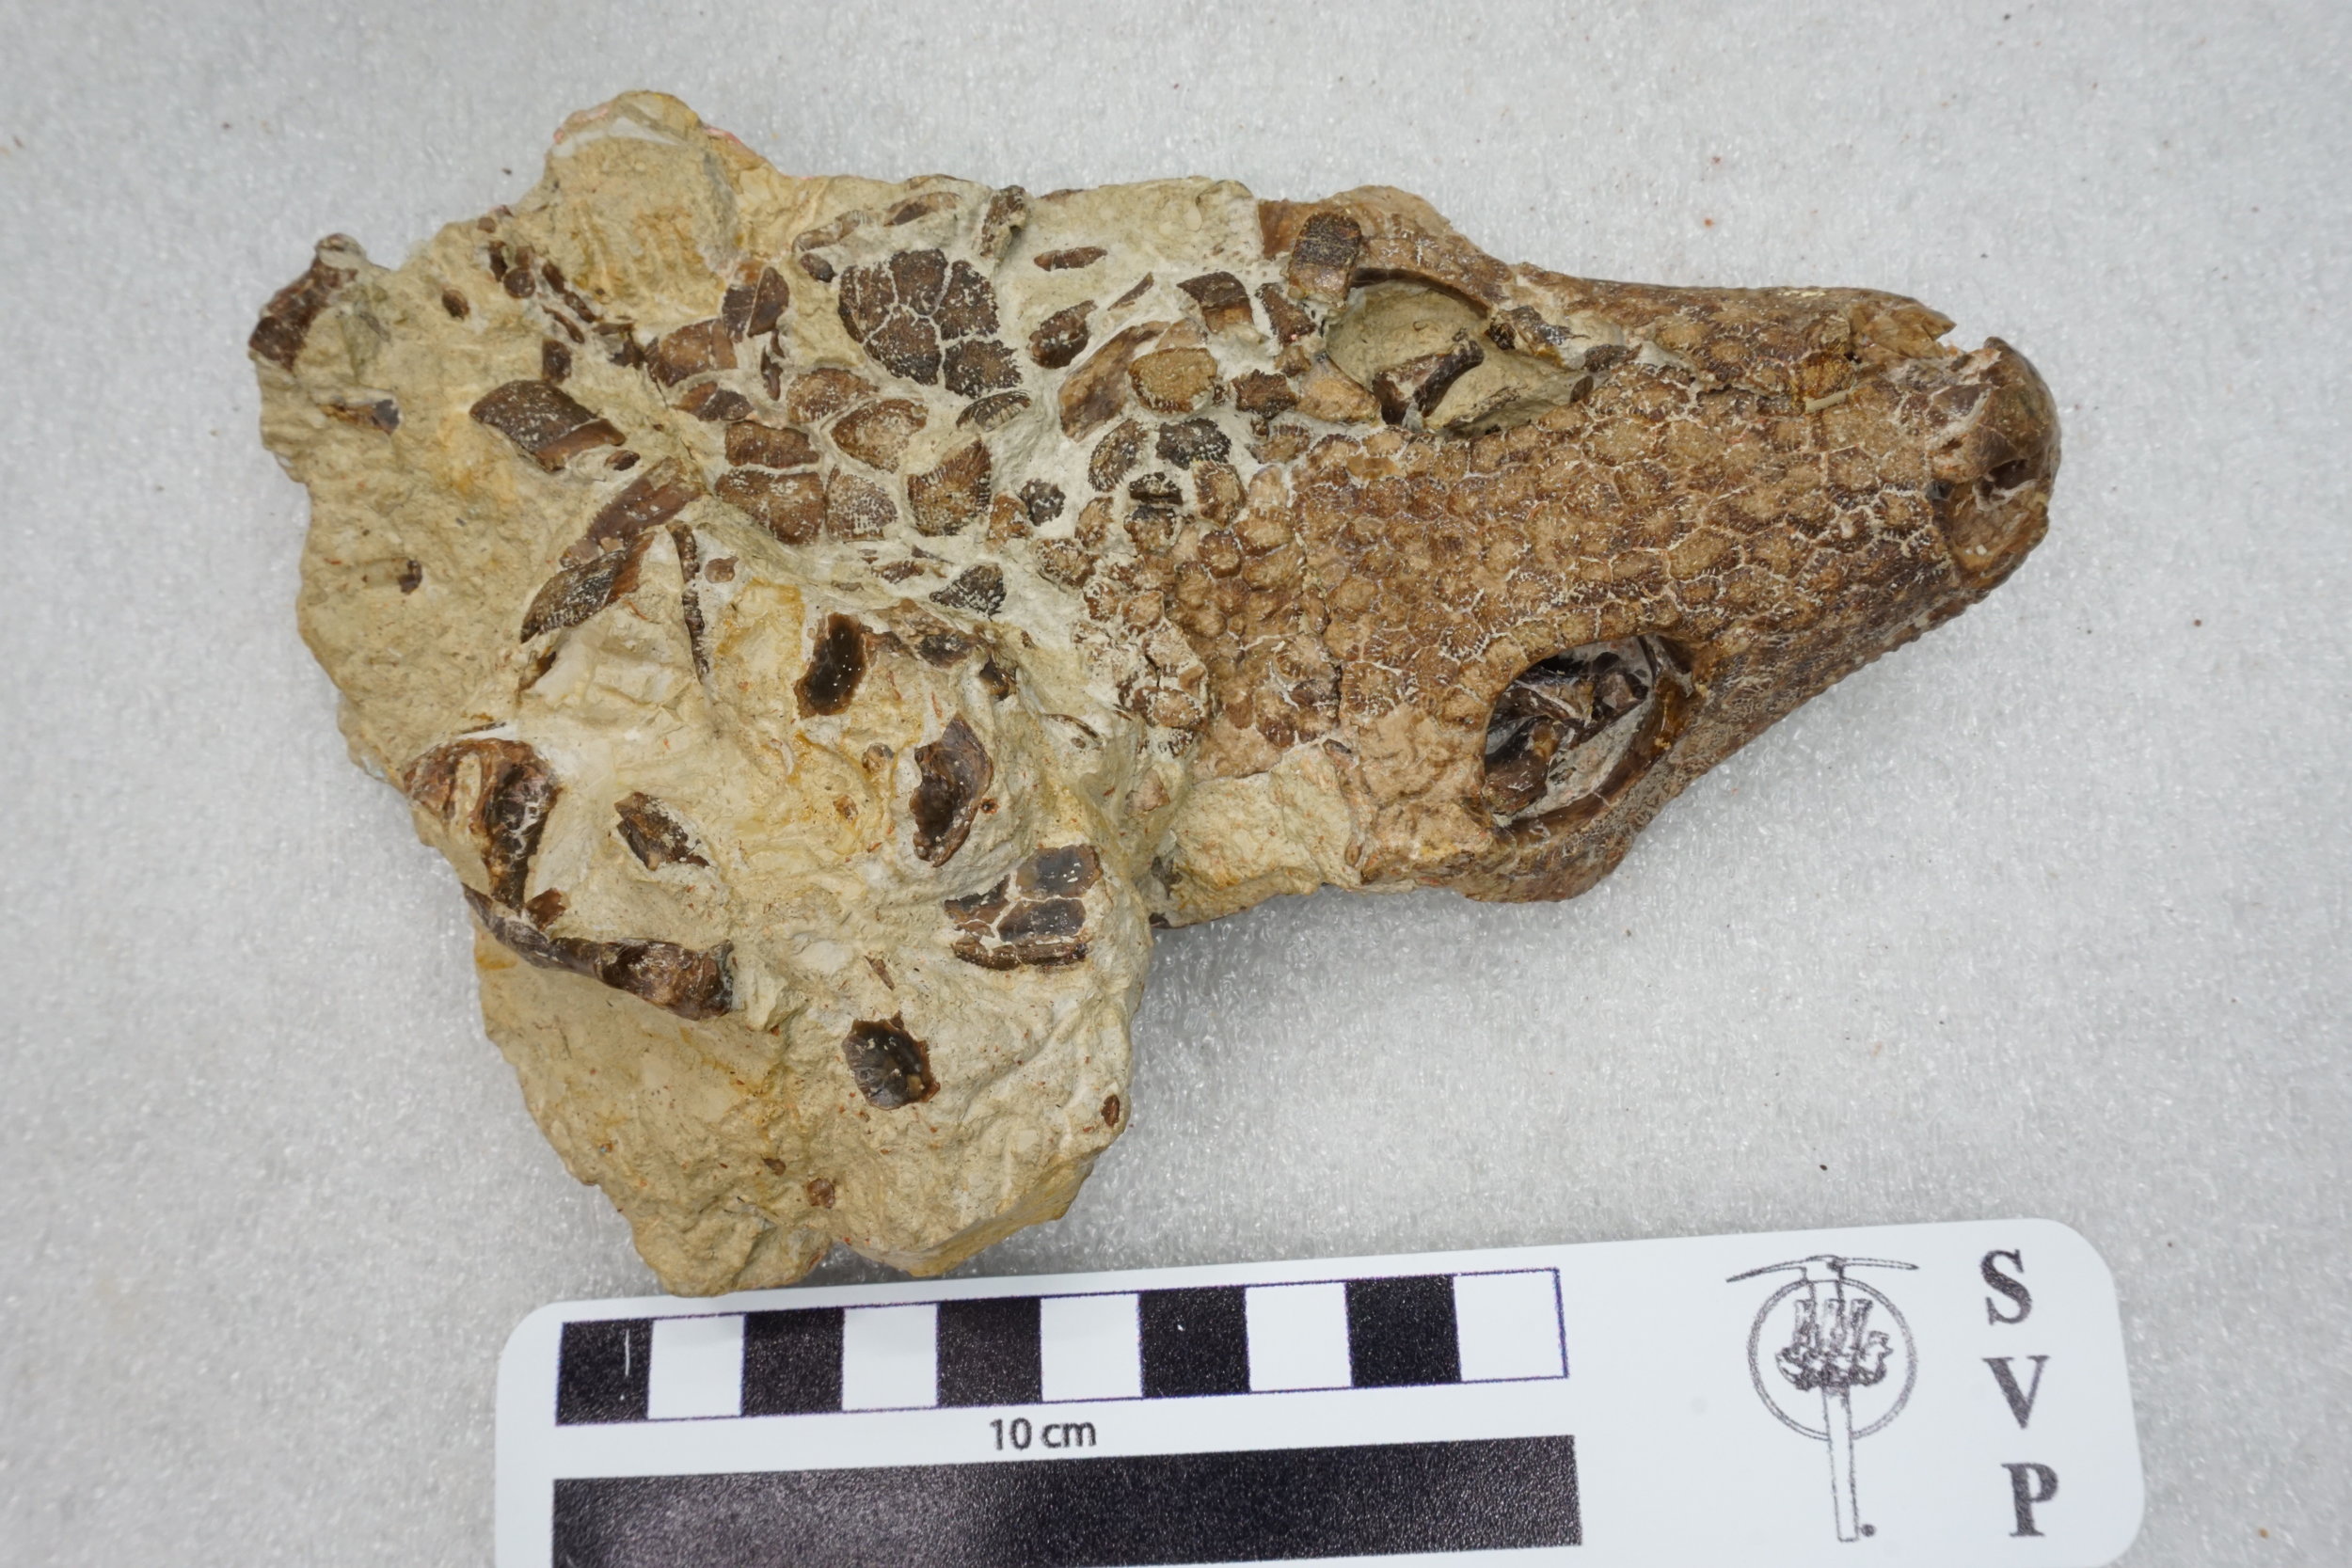  A rare complete skull of a 50-million-year-old fossil anguid lizard - my favorite specimen in the collection at the UC Museum of Paleontology (UCMP 126000)! 